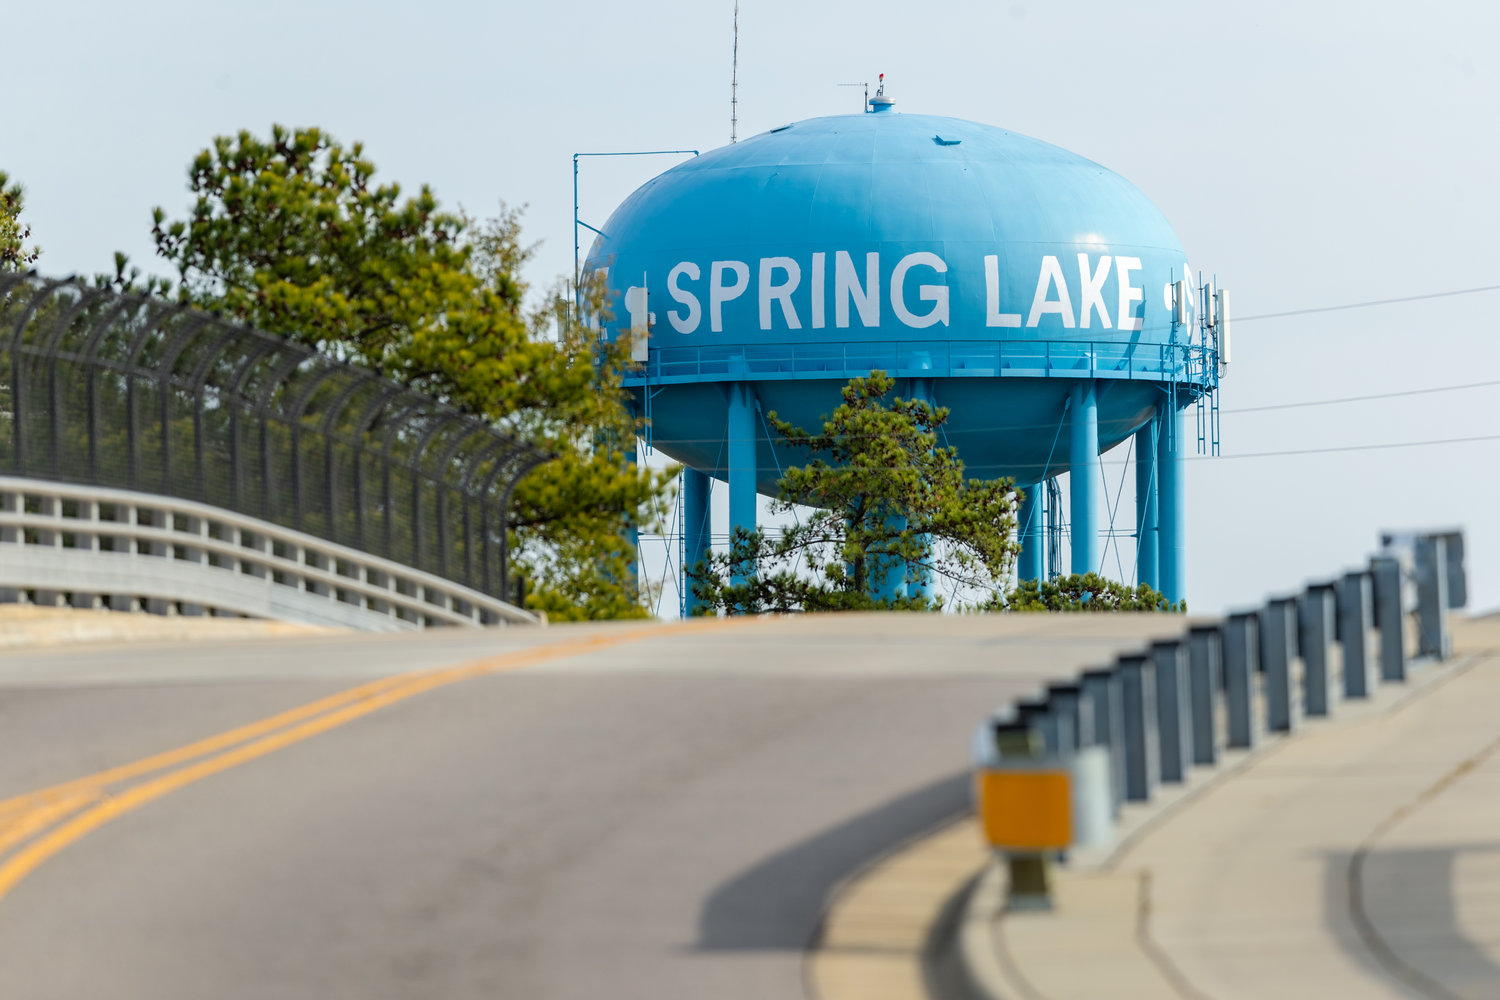 The Spring Lake Board of Aldermen will meet at 6 p.m. Monday at Town Hall.